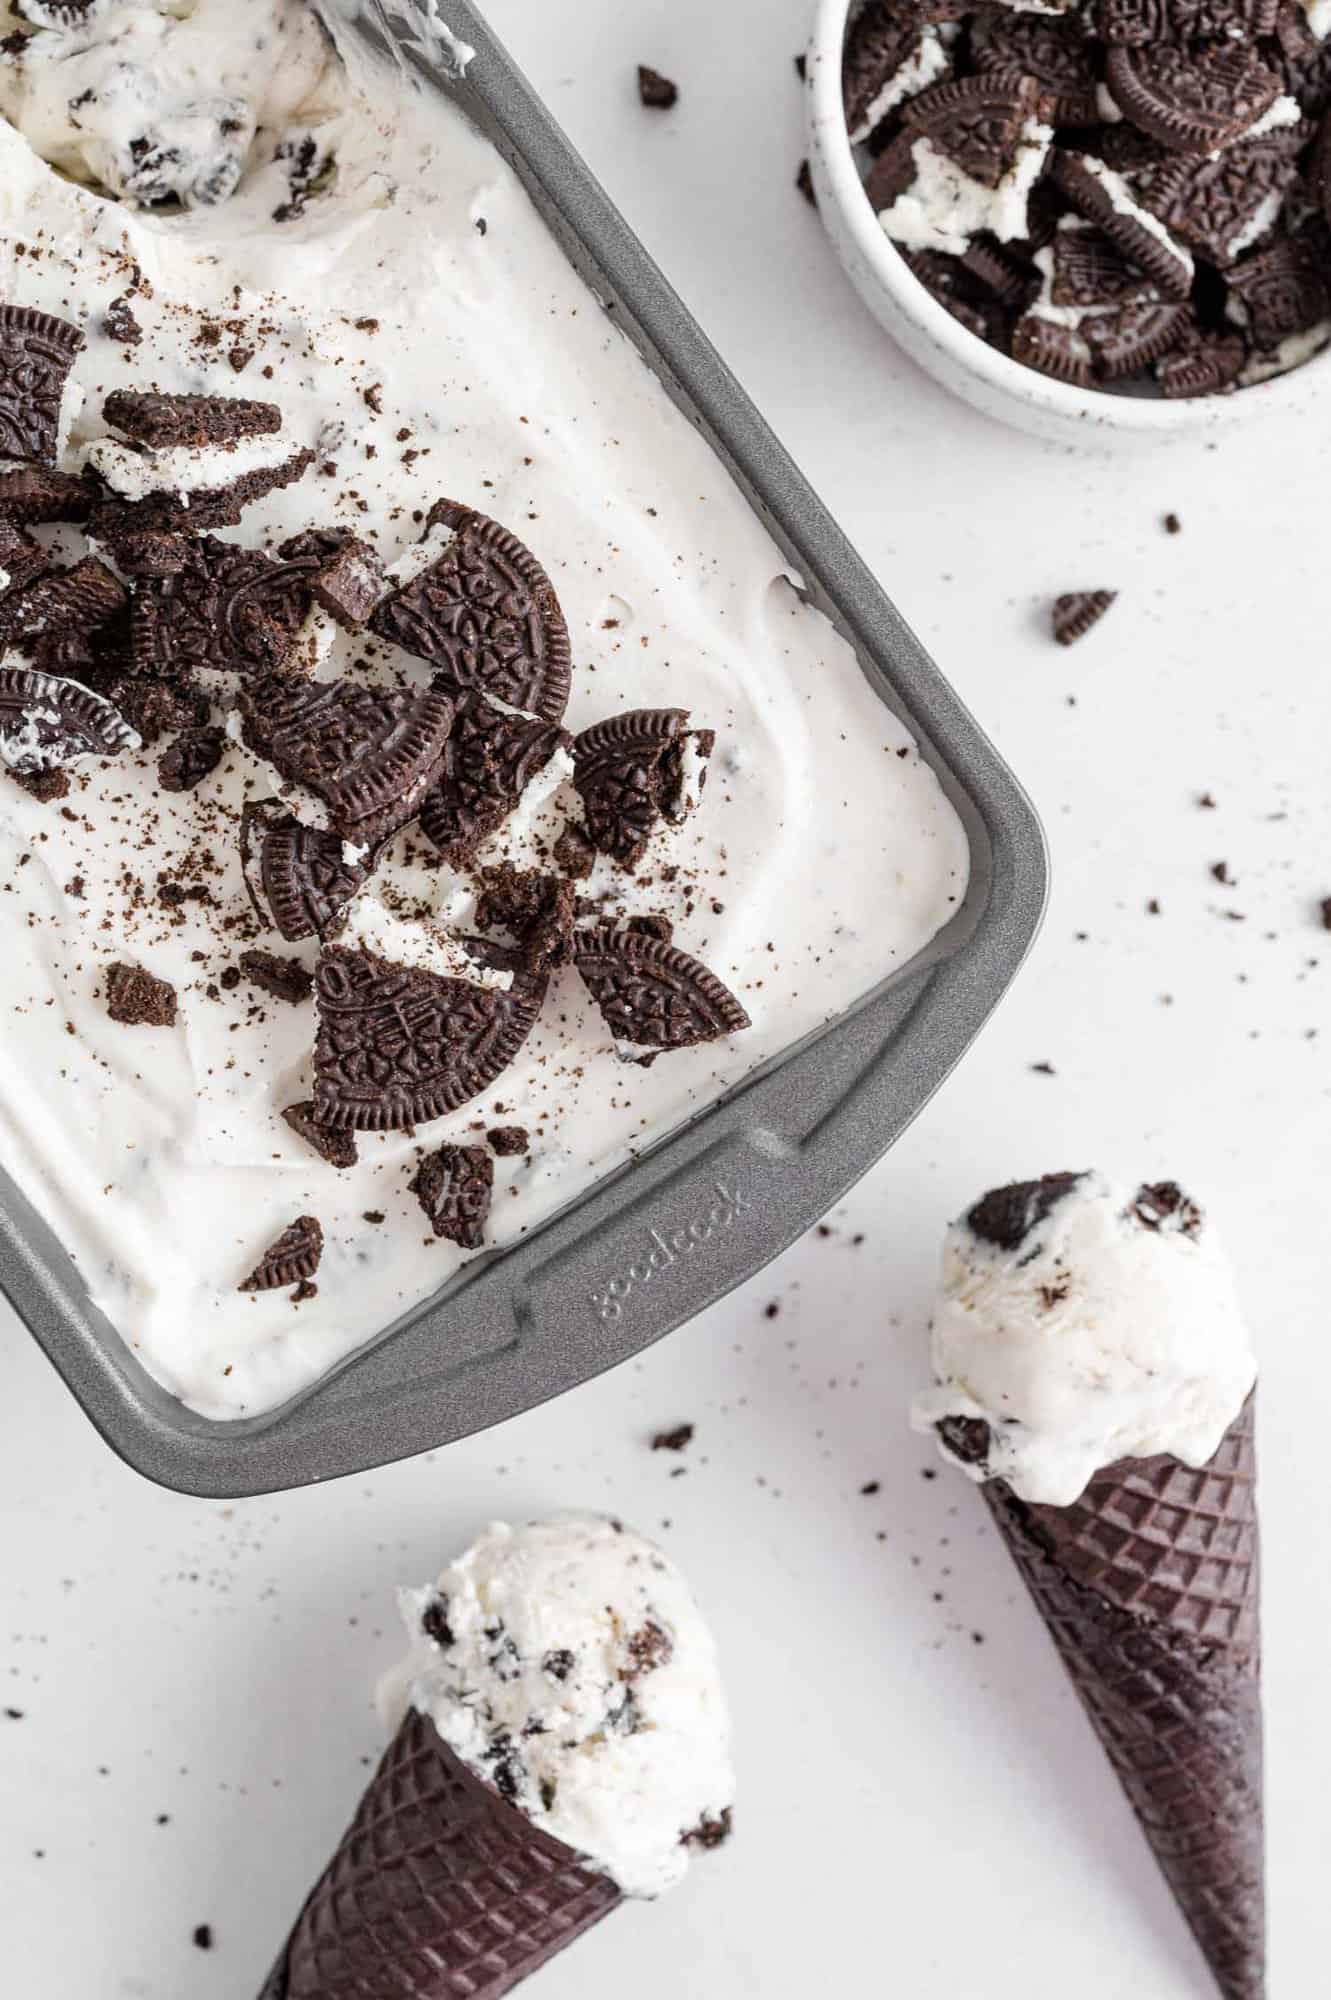 Cookies and cream ice cream in a pan and in cones.